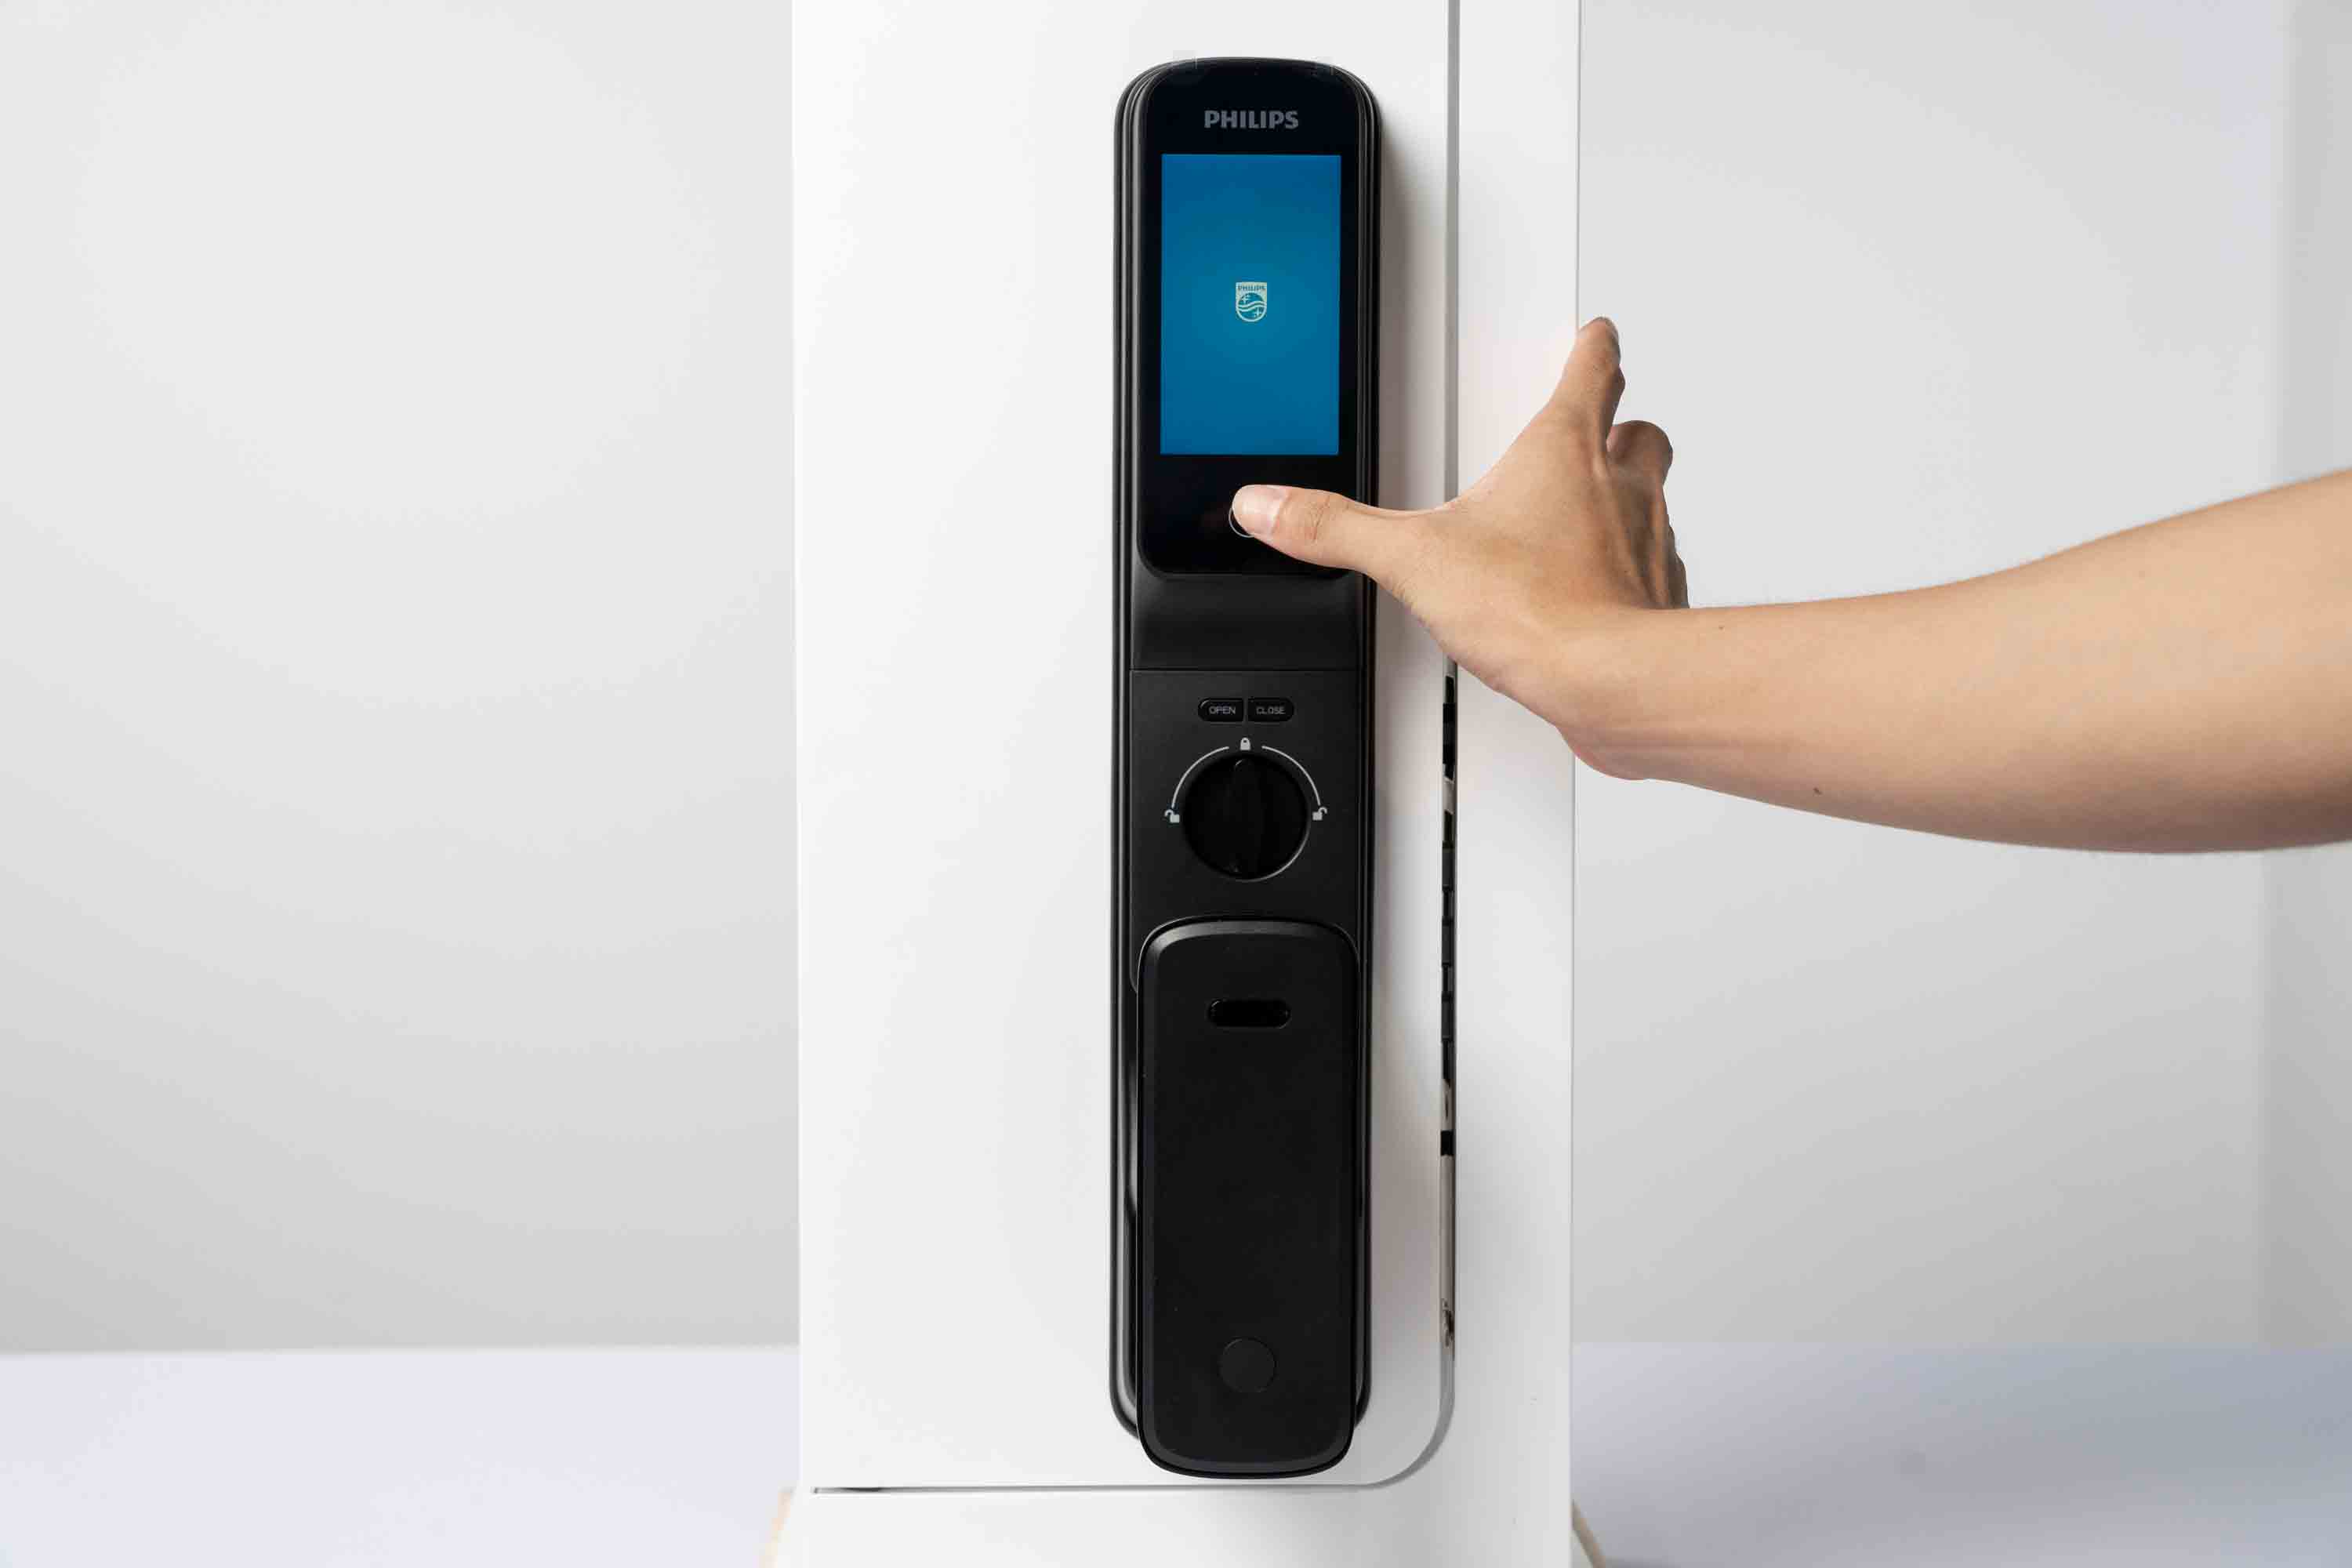 New versions of α hardcore upgrade! Philips Alpha-VP visual smart lock debuts with screen, start your new experience with visual smart lock!